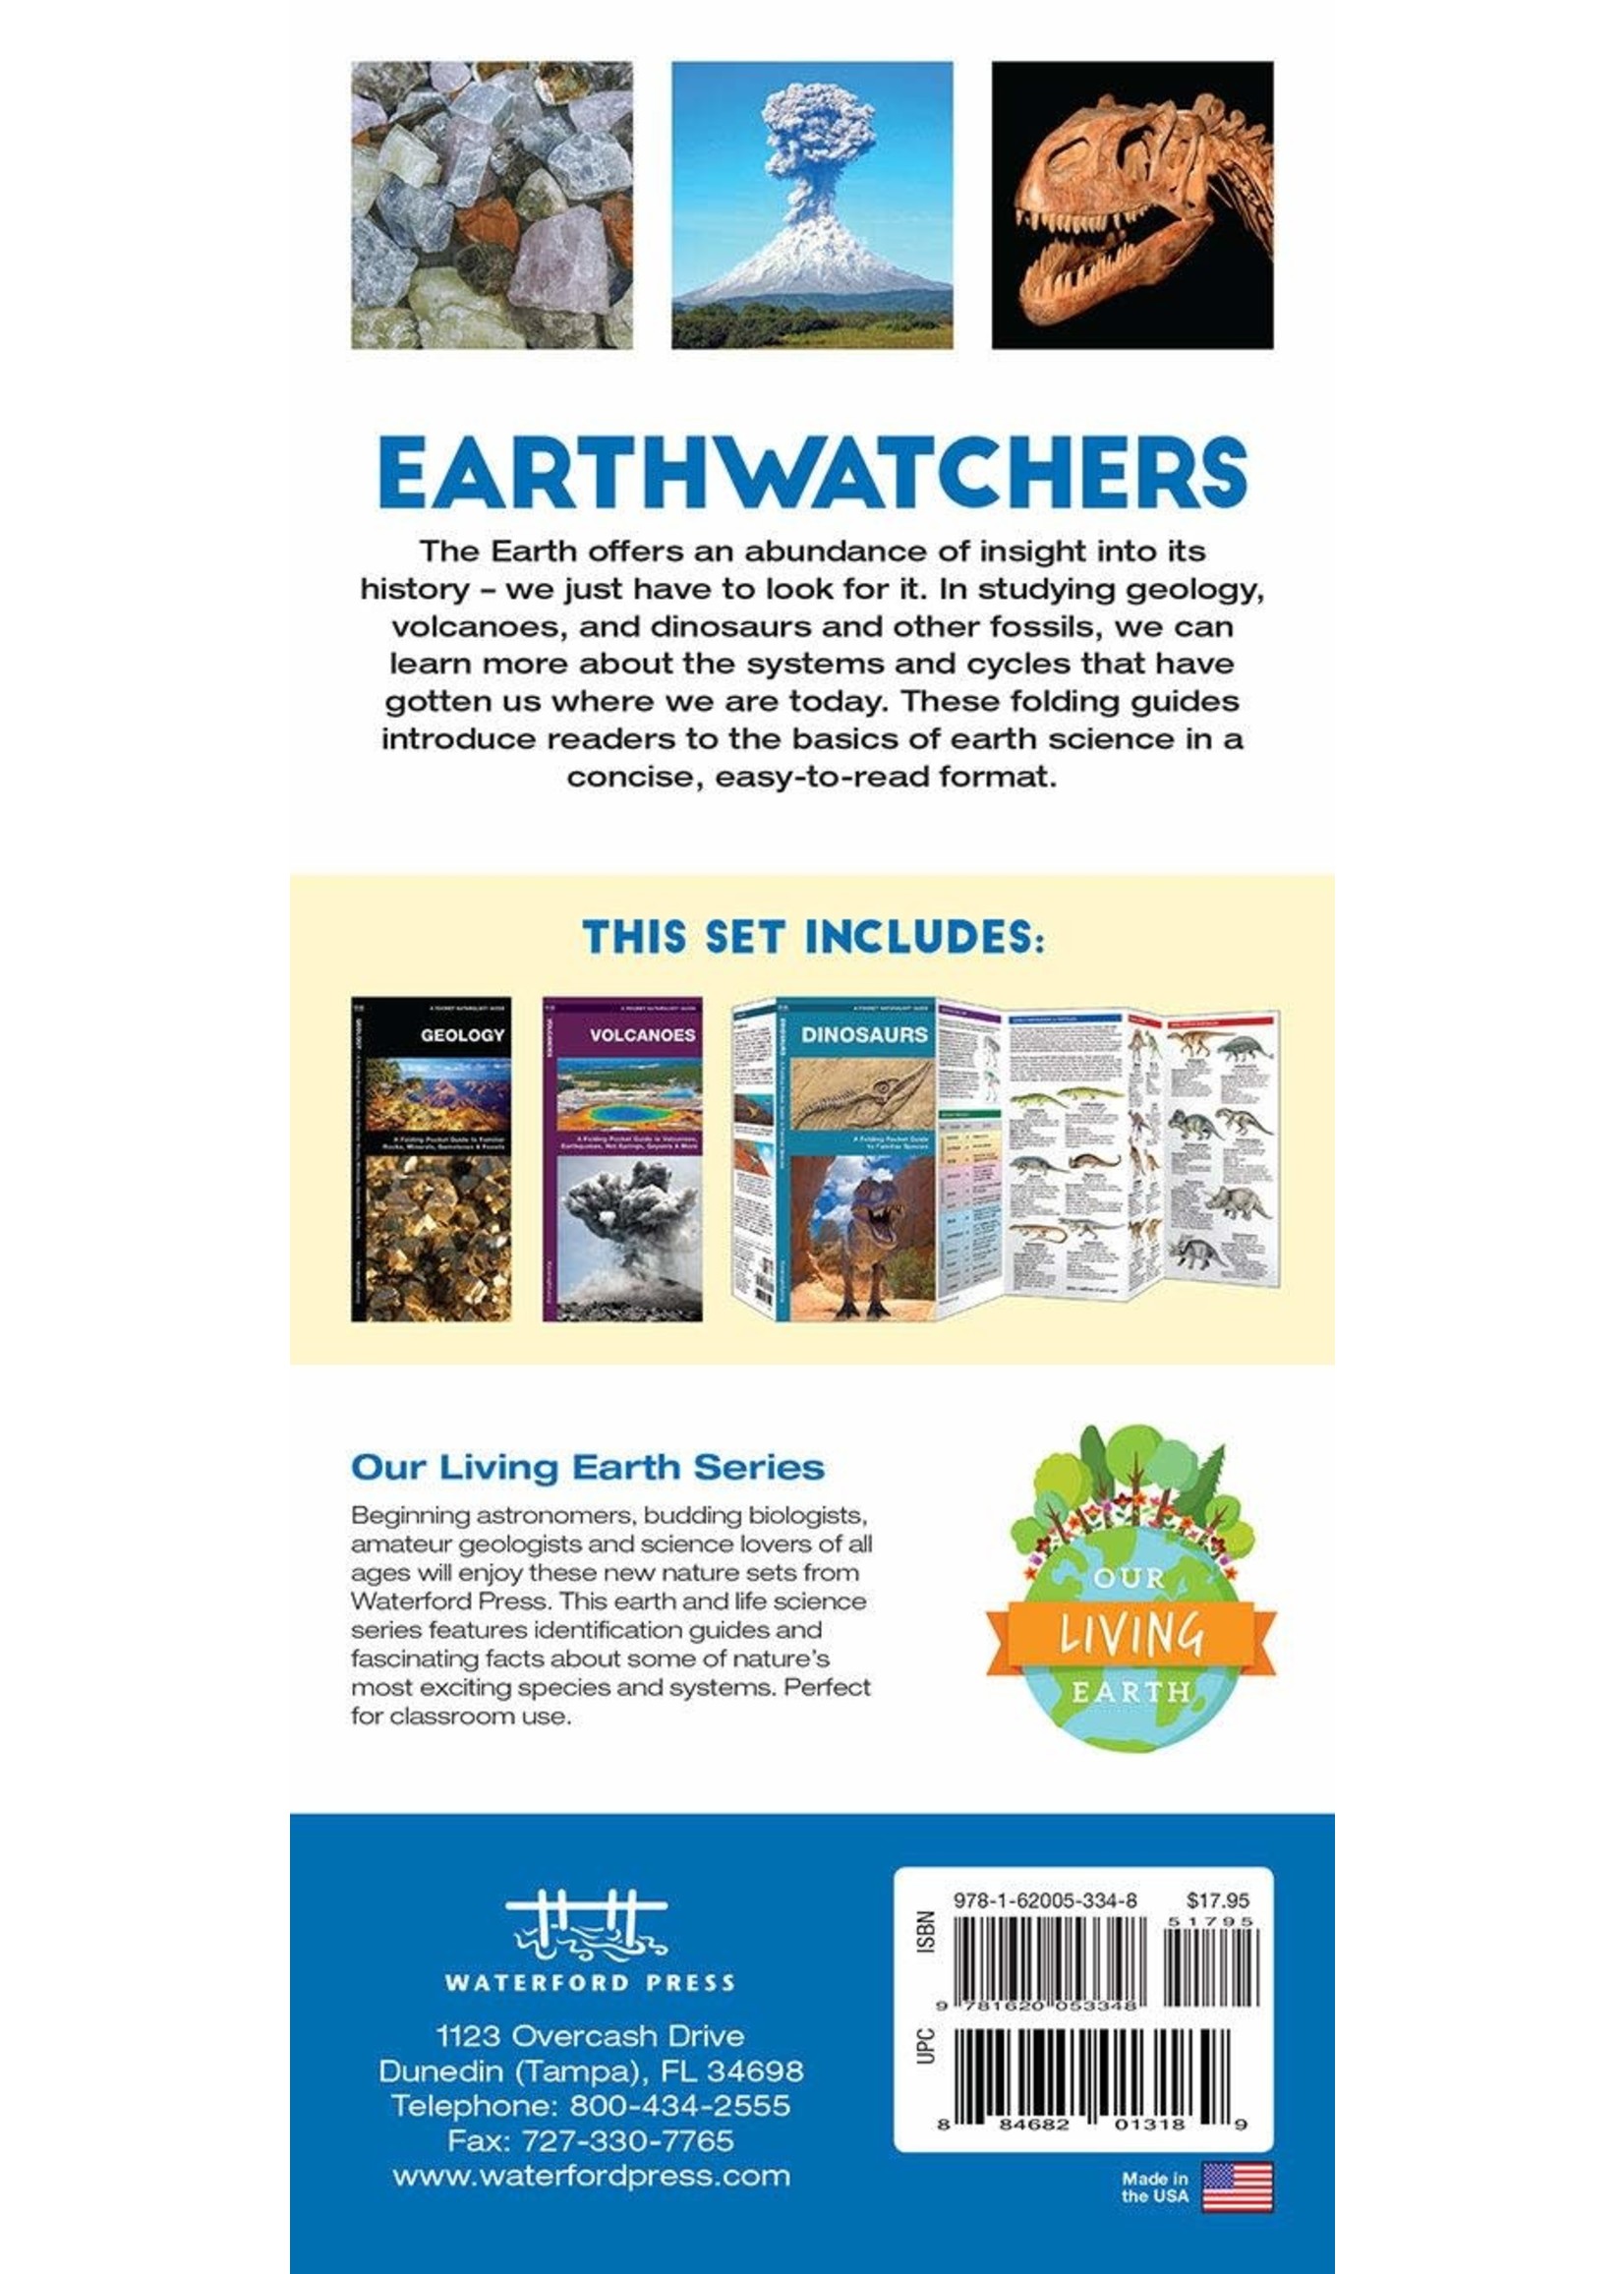 Earthwatchers: Pocket Guides to Geology, Volcanoes, and Dinosaurs